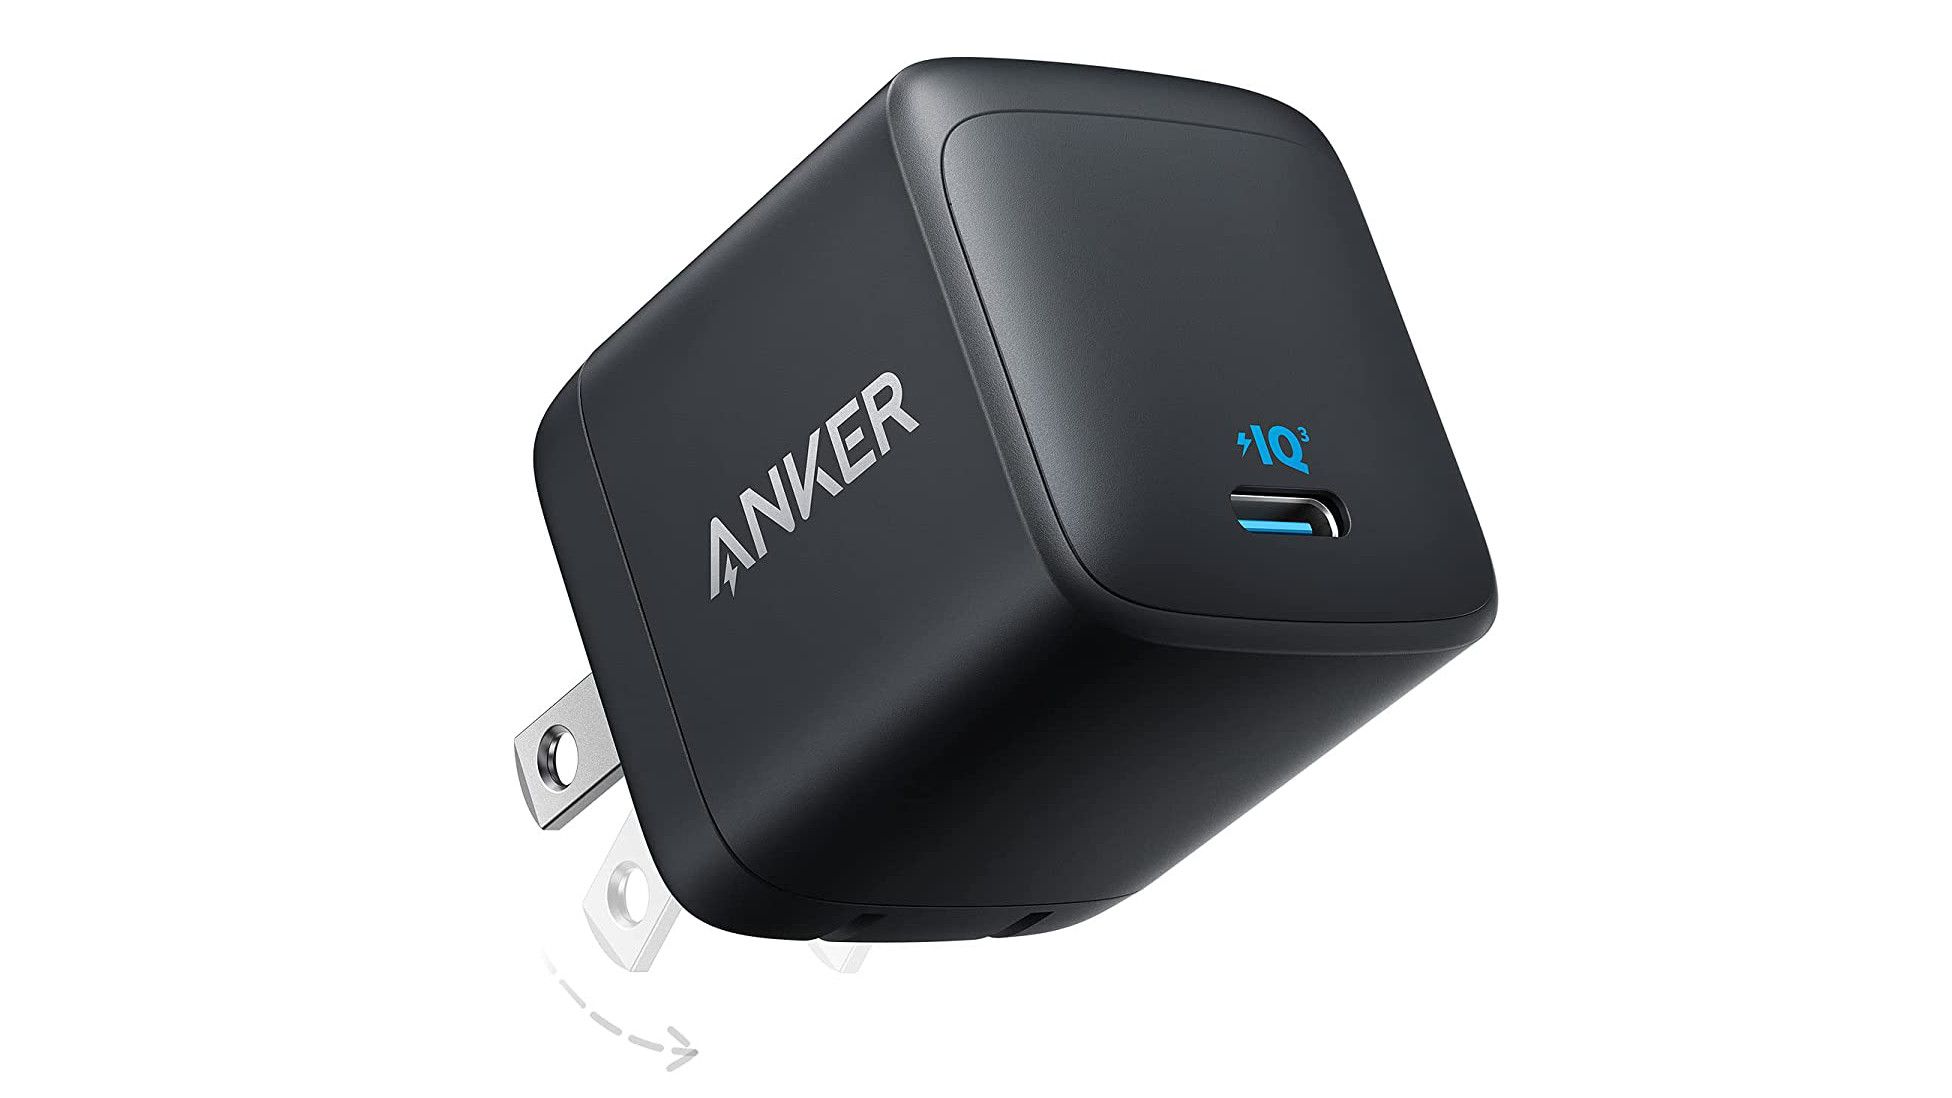 anker-313-45w-usbc-charger-render-01